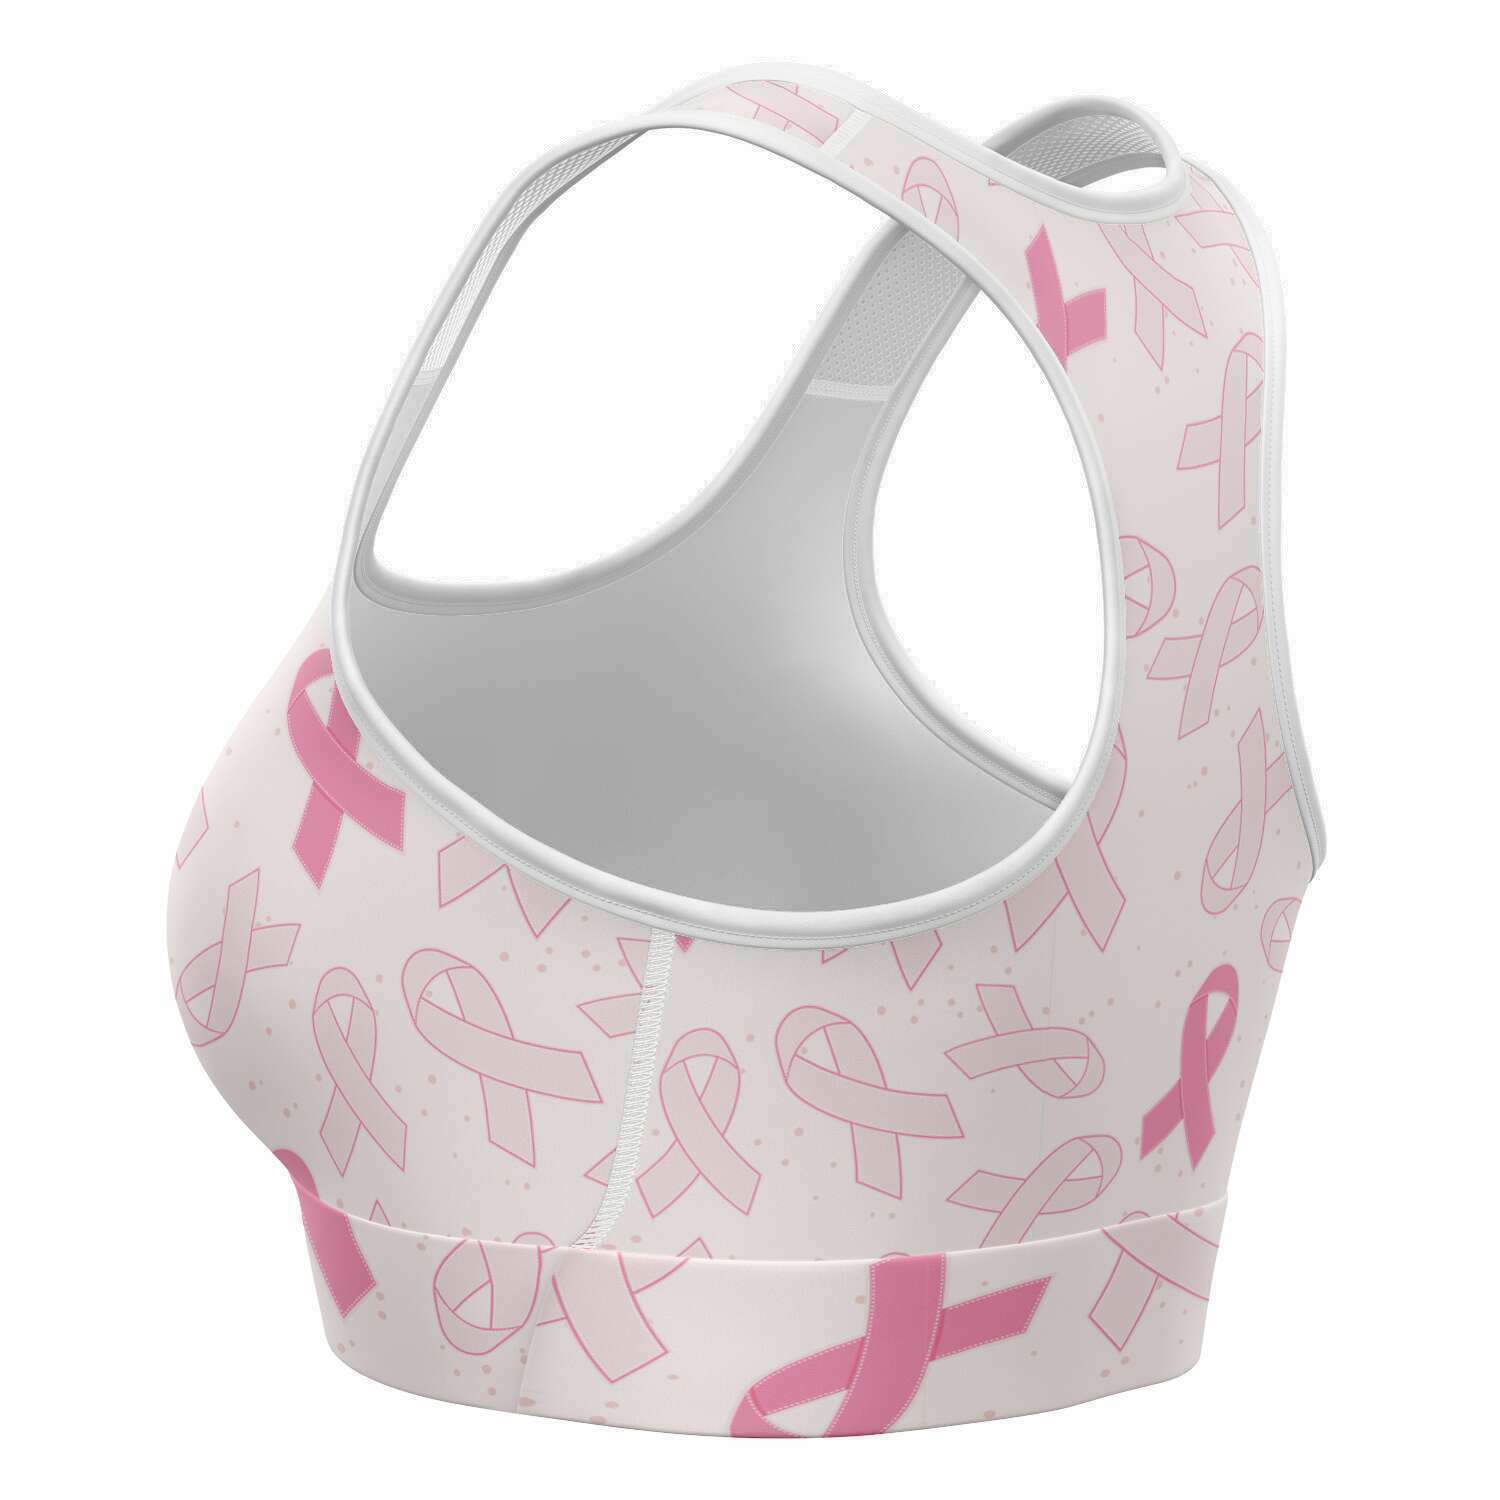 Women's Breast Cancer Awareness Month Pink Ribbons Athletic Sports Bra Left